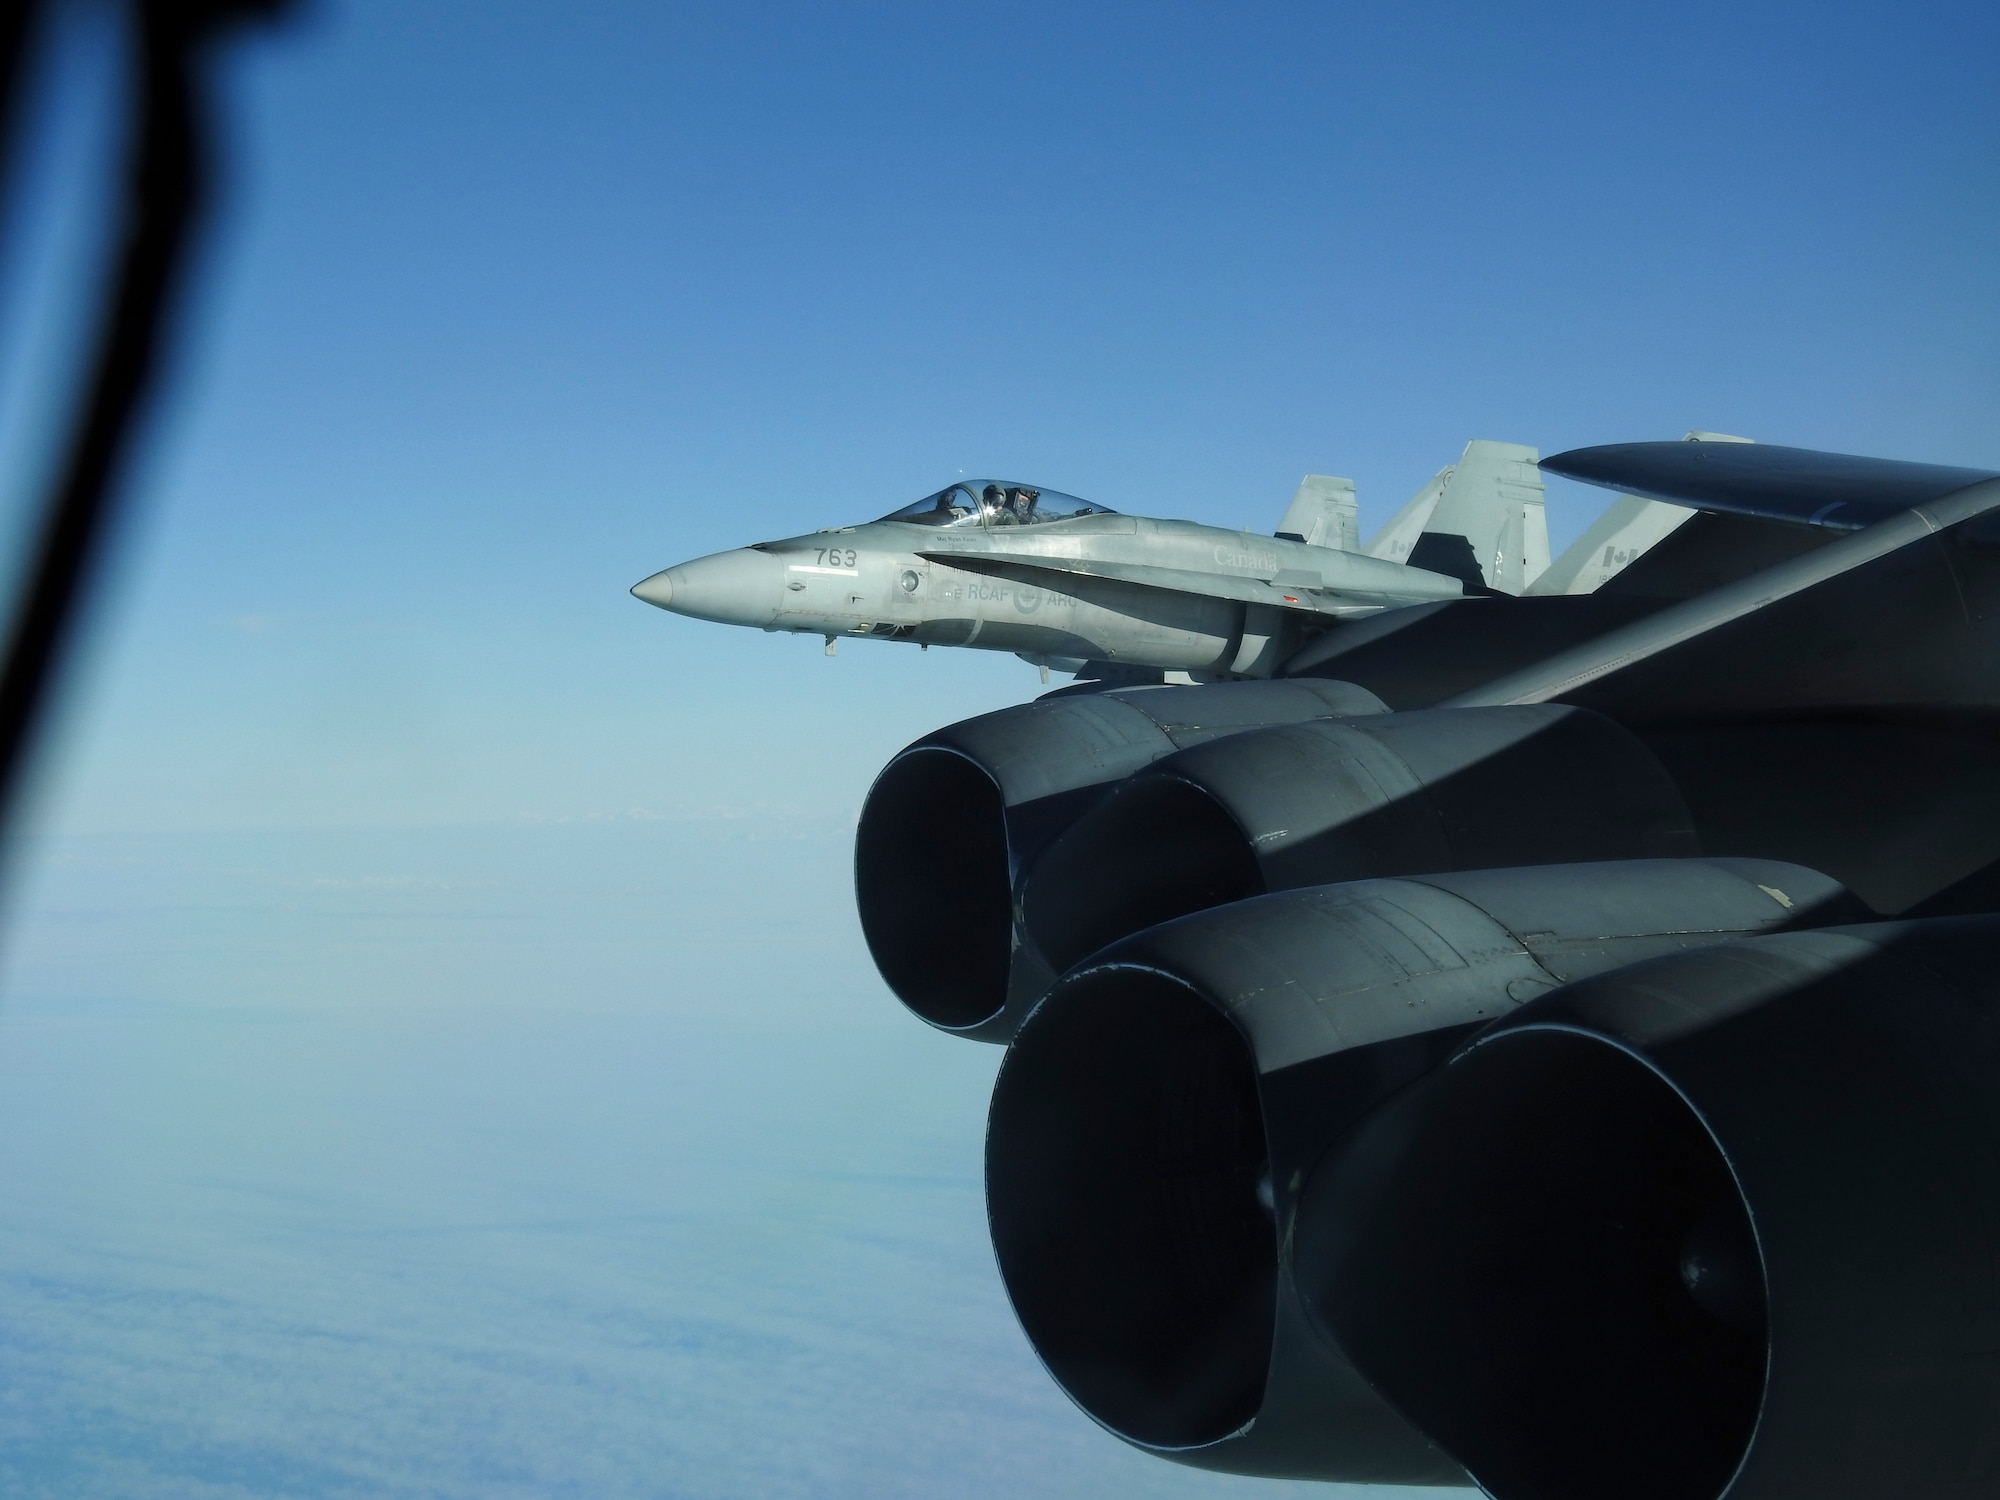 A Royal Canadian Air Force CF-18 Hornet, escorts a B-52 Stratofortress during a North American Aerospace Defense Command (NORAD) mission, June 14, 2020. NORAD routinely conducts intercept training in support of its mission to protect the sovereign airspaces of the United States and Canada. (Courtesy Photo)